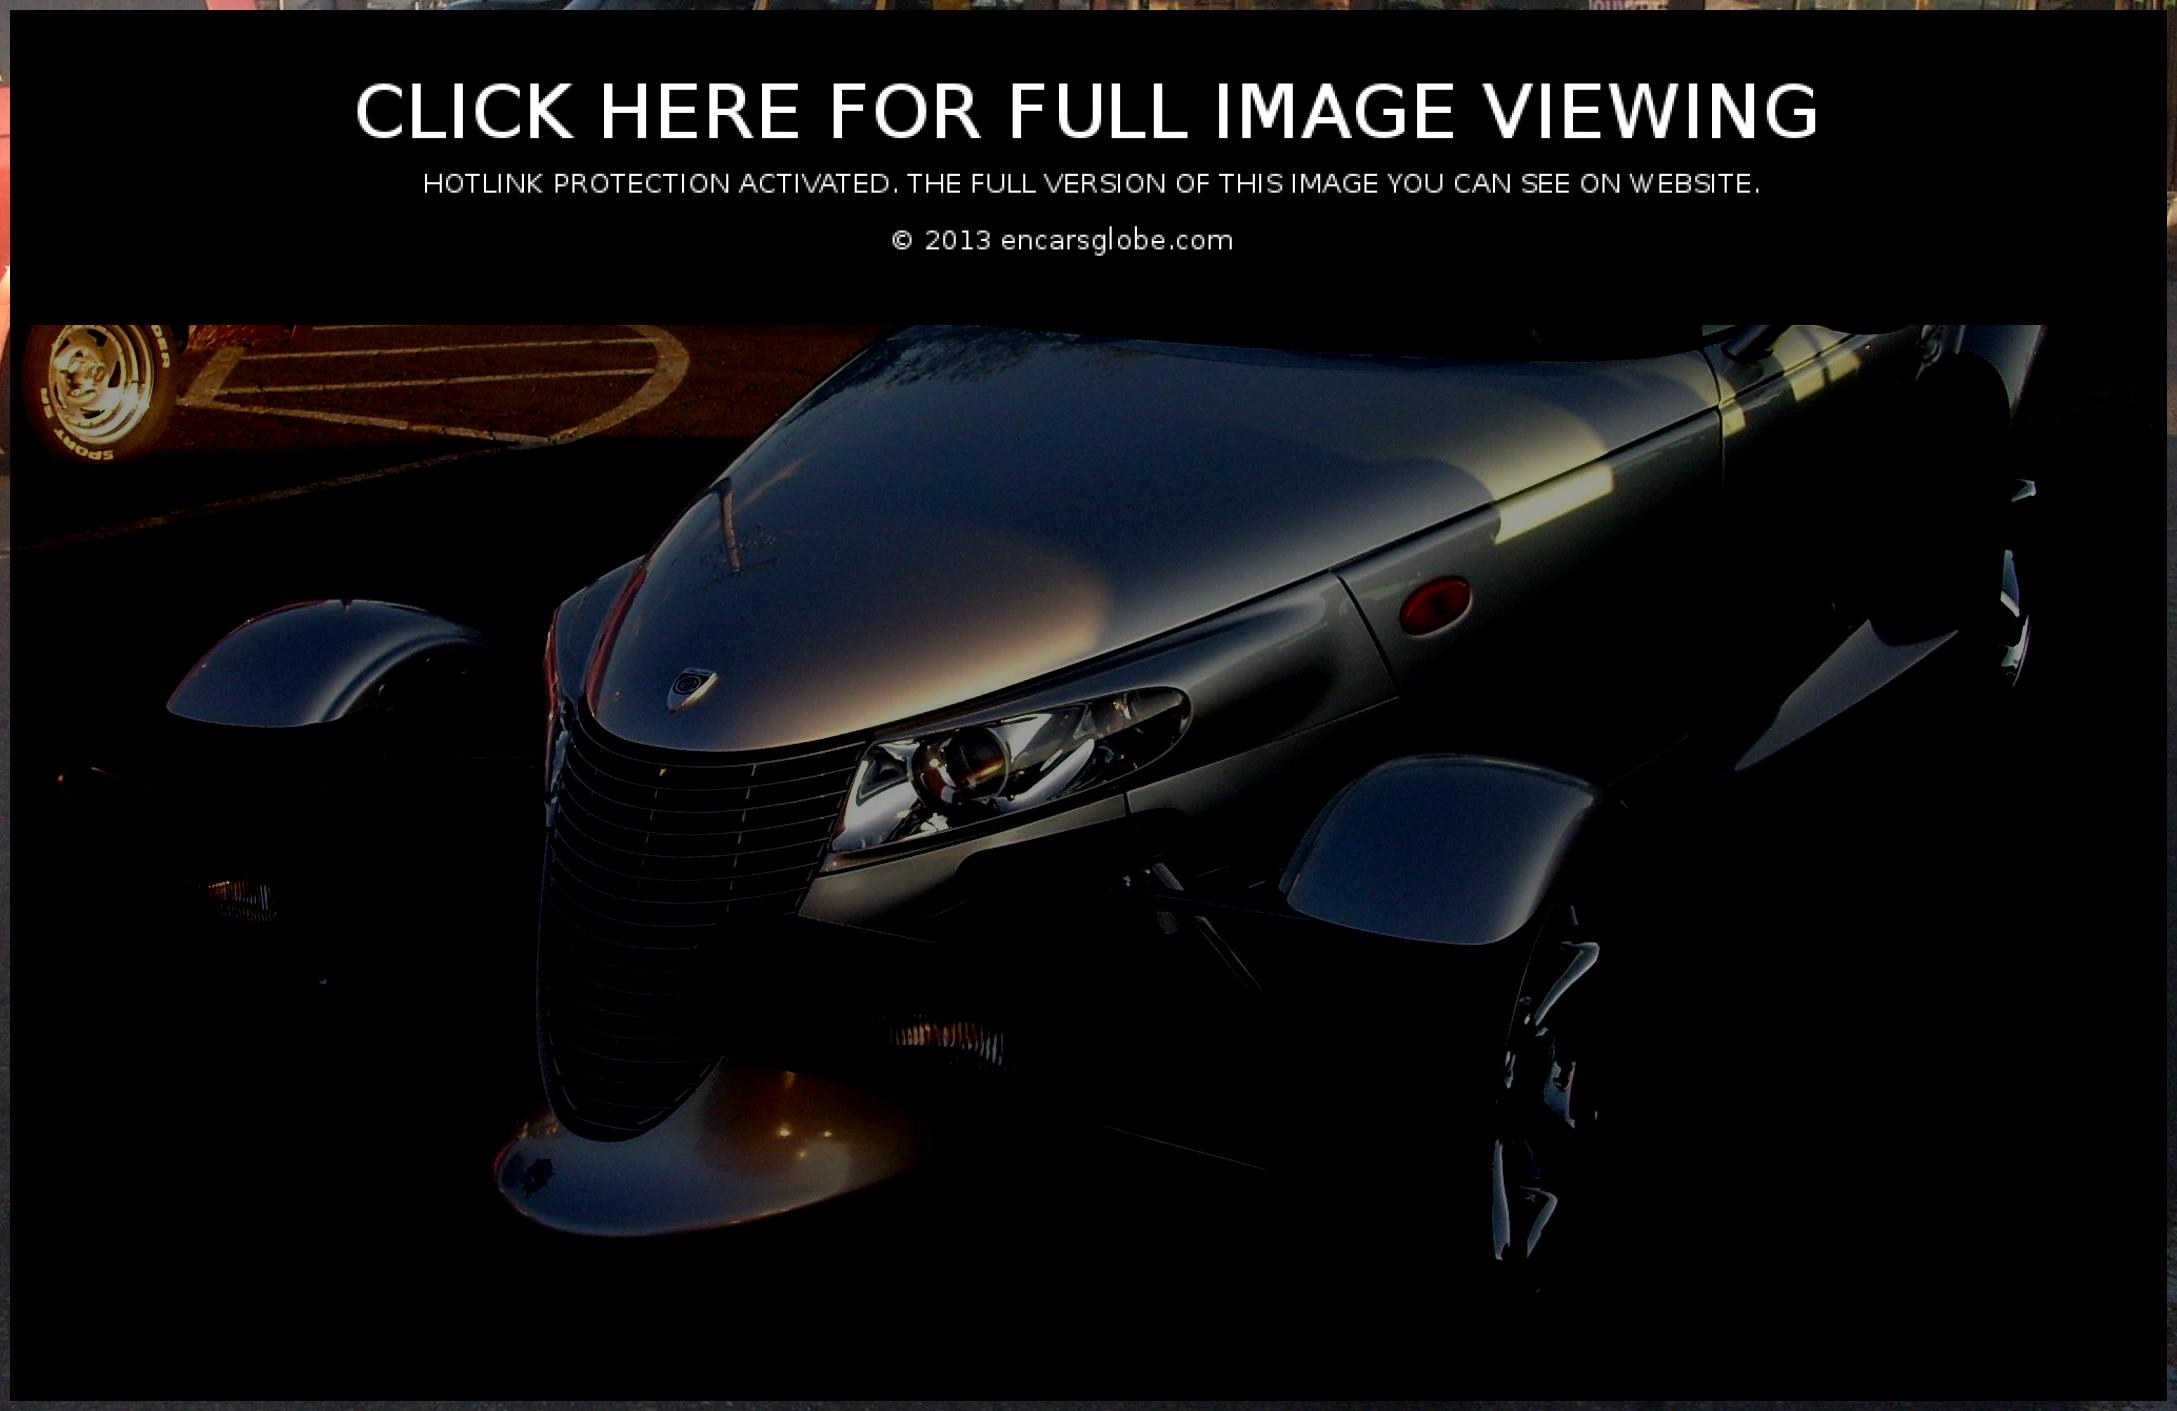 Chrysler Prowler: Photo gallery, complete information about model ...